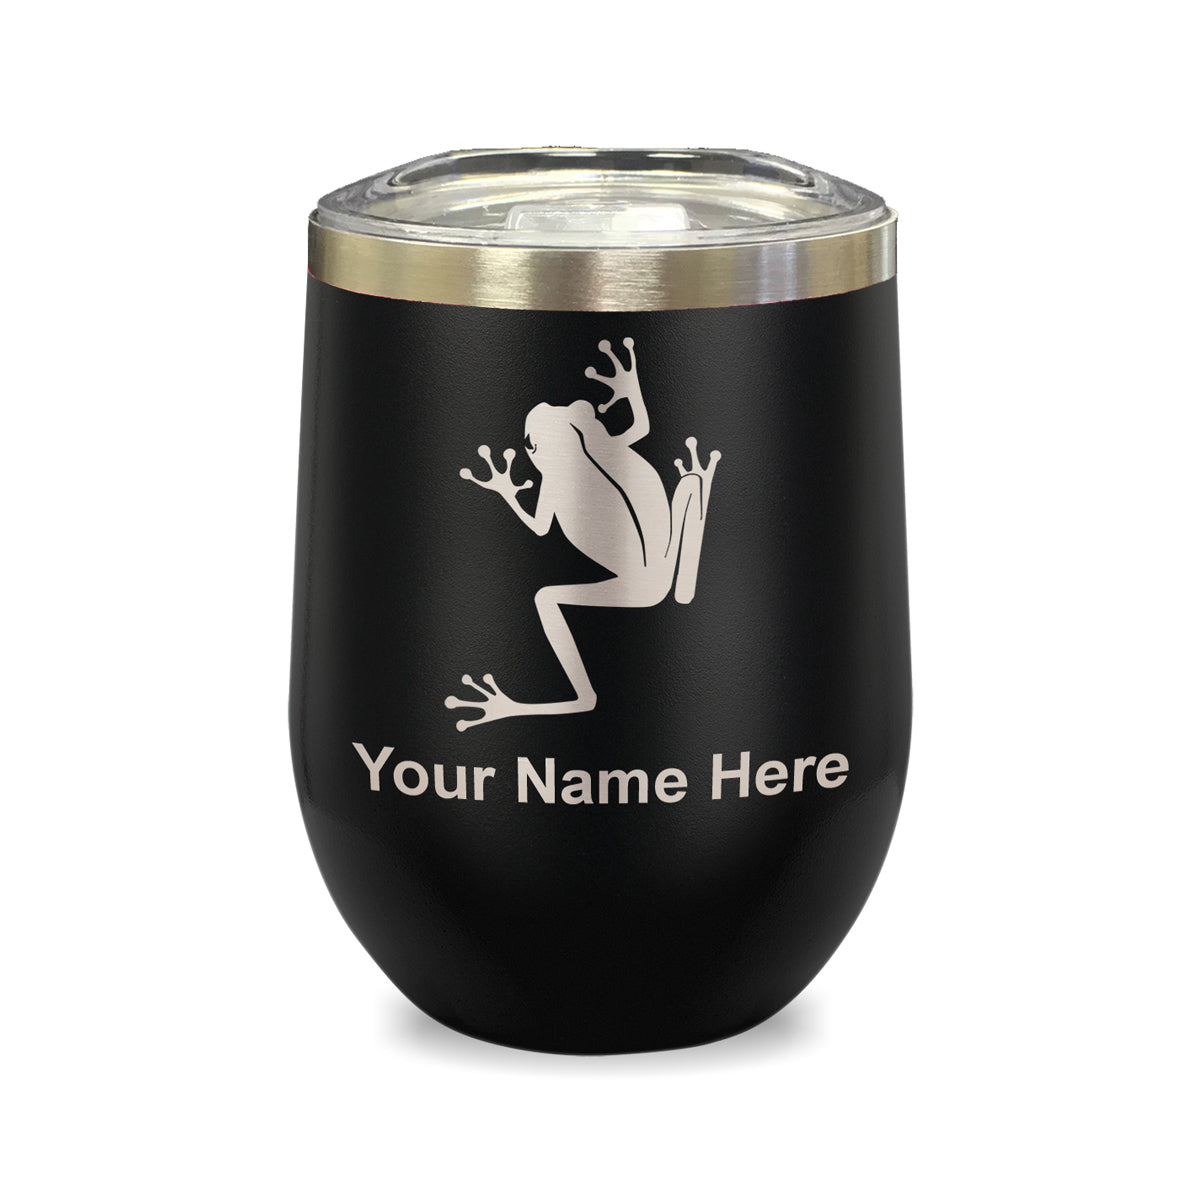 LaserGram Double Wall Stainless Steel Wine Glass, Tree Frog, Personalized Engraving Included